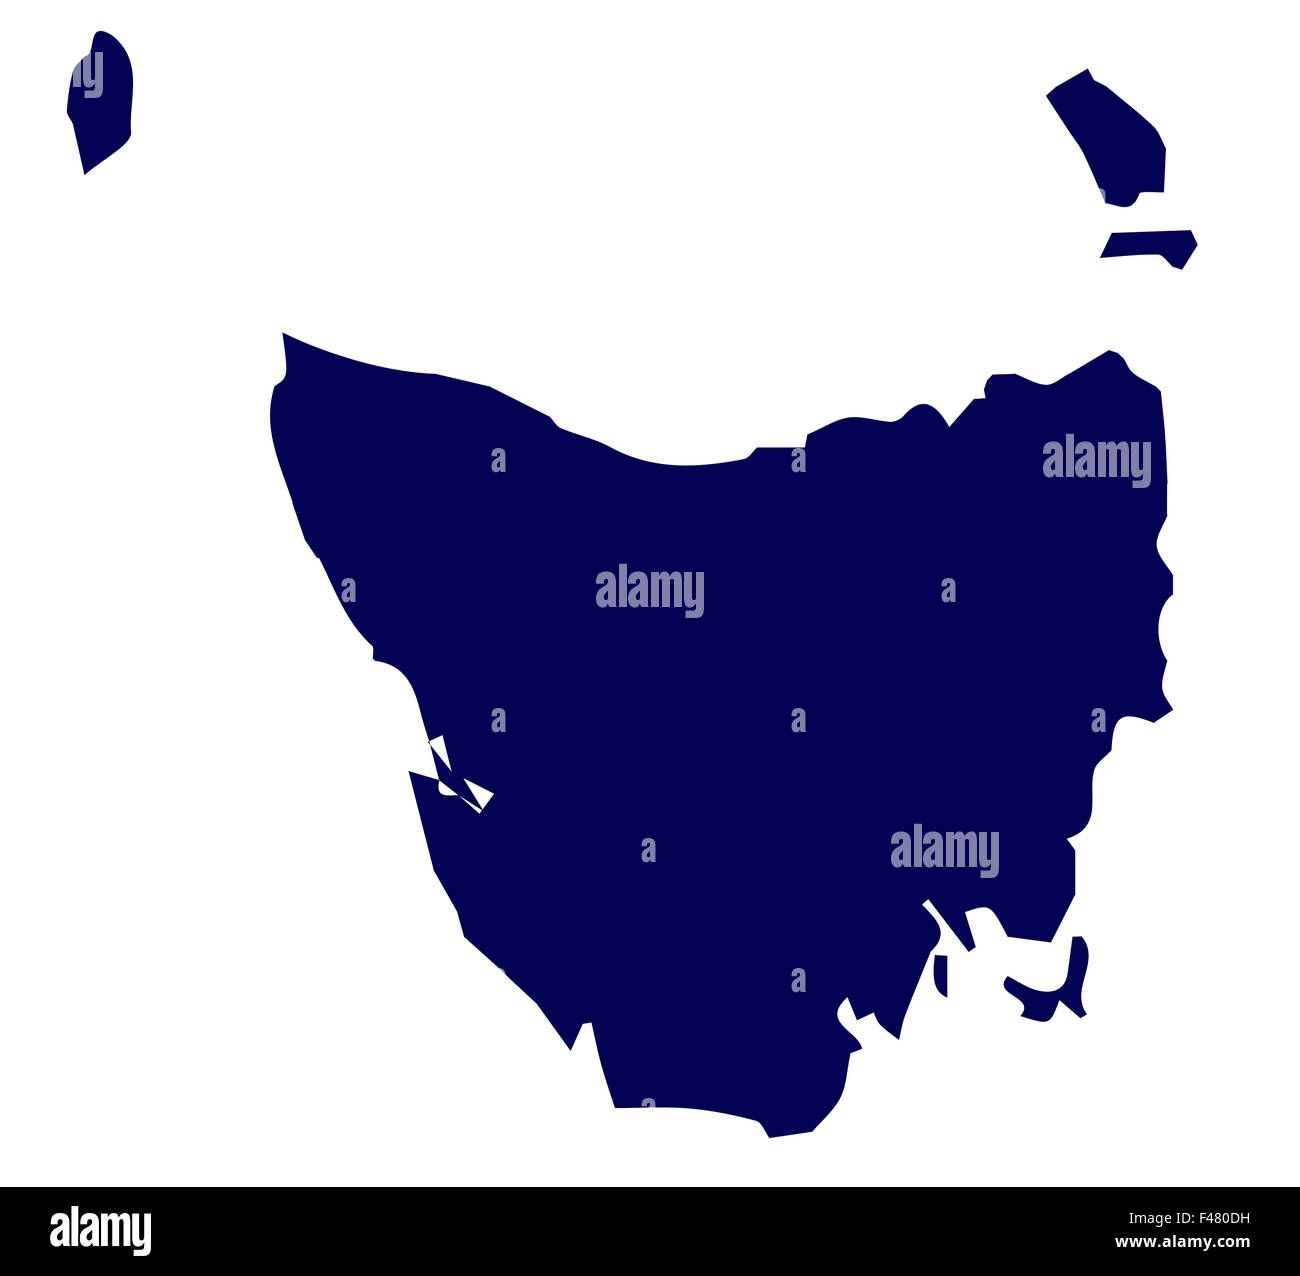 Silhouette map of the Australian state of Tasmania over a white background Stock Photo